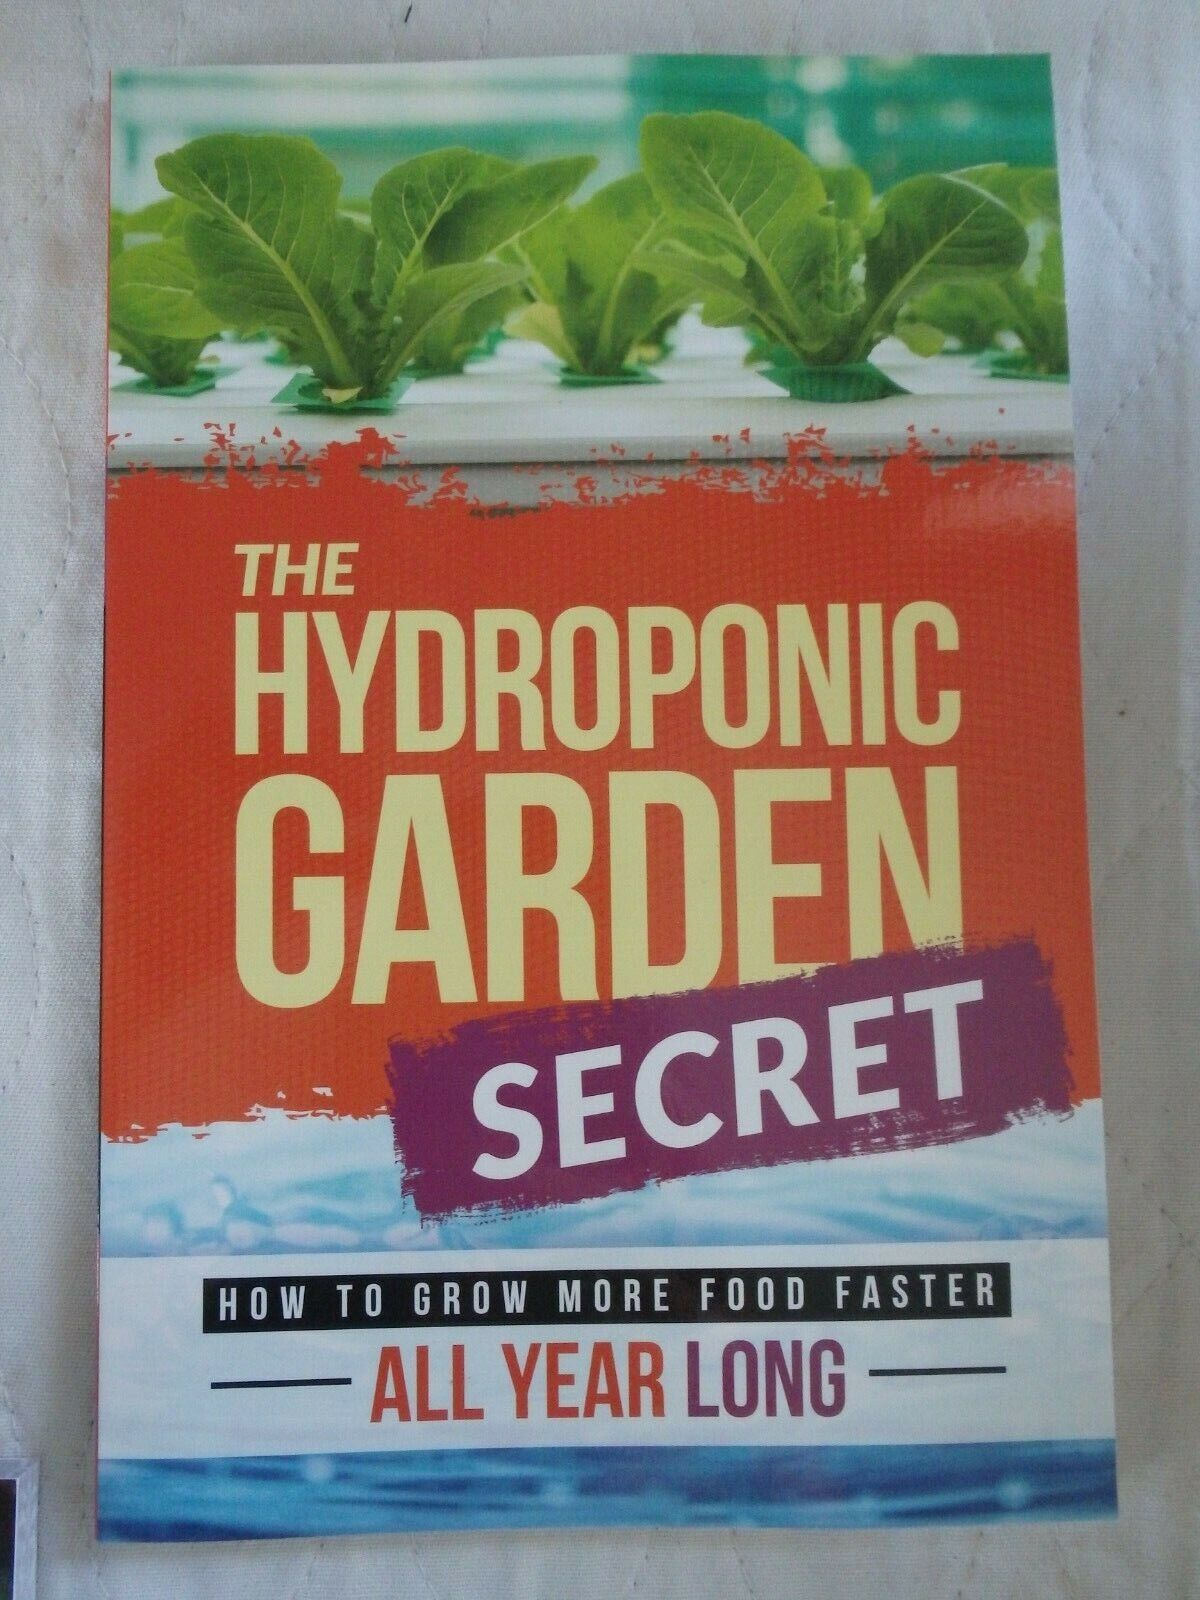 The Hydroponic Secret Garden : How to Grow More Food Faster All Year Long by The